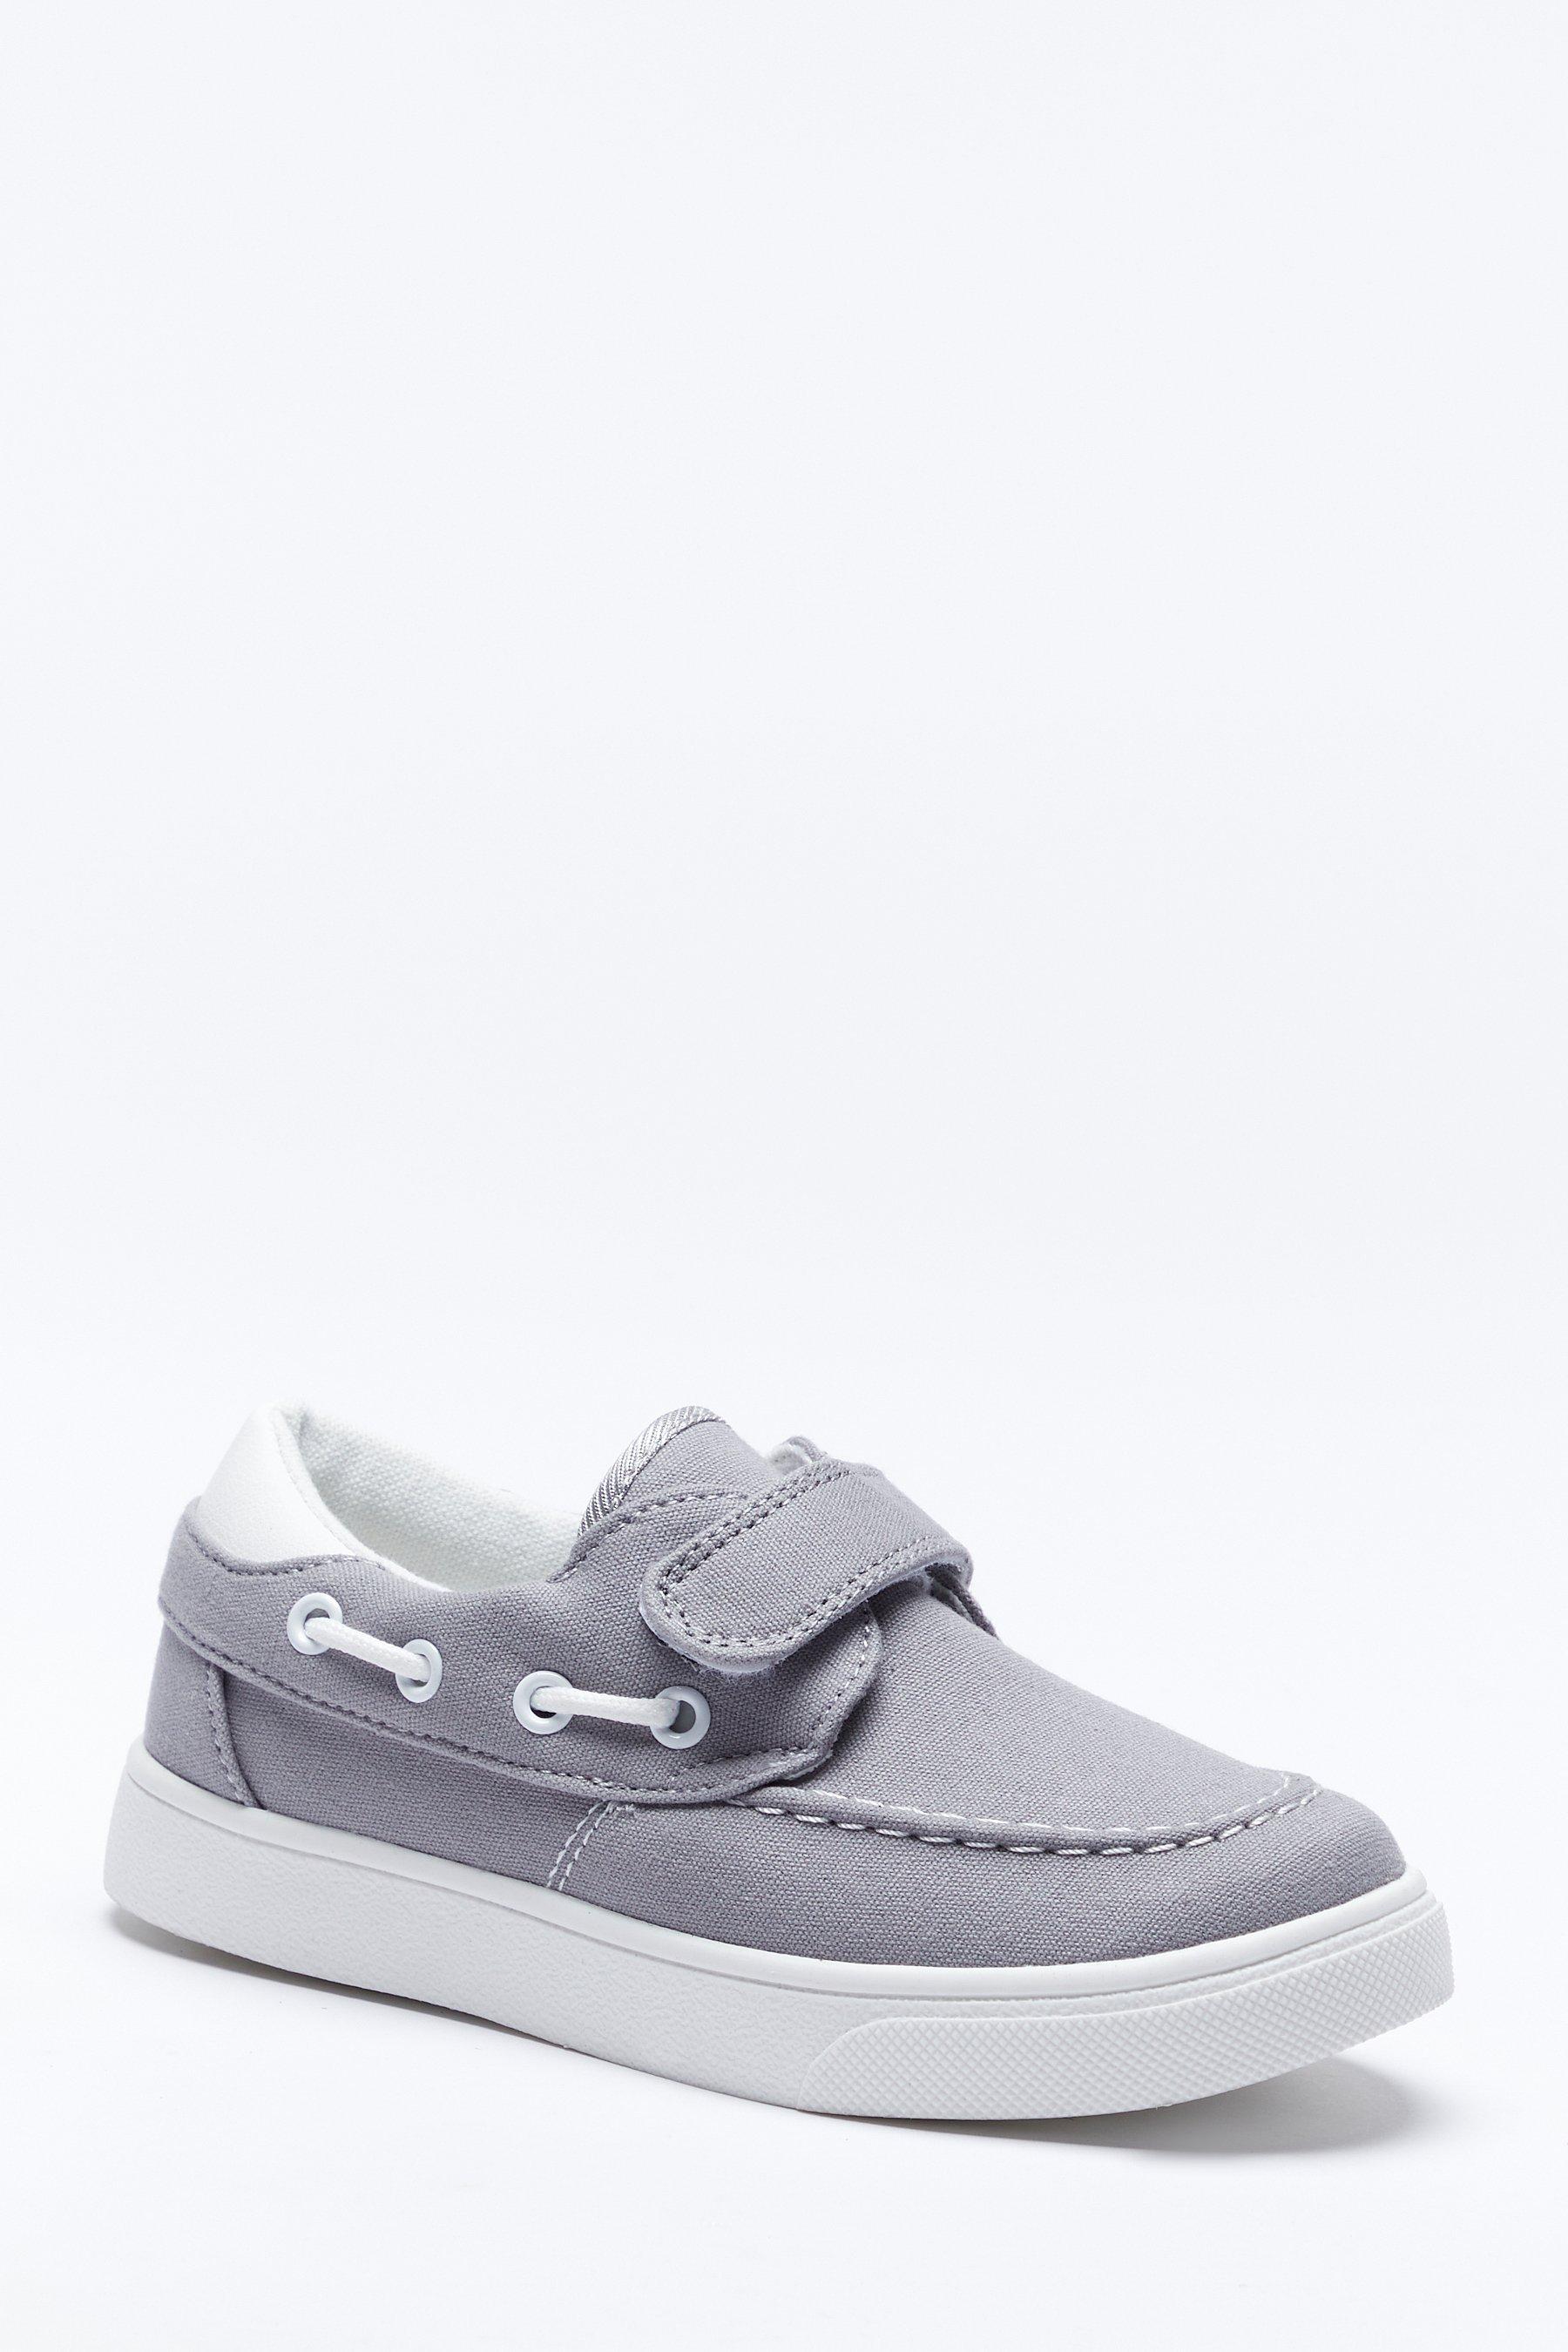 Younger Boys Boat Shoes | Studio